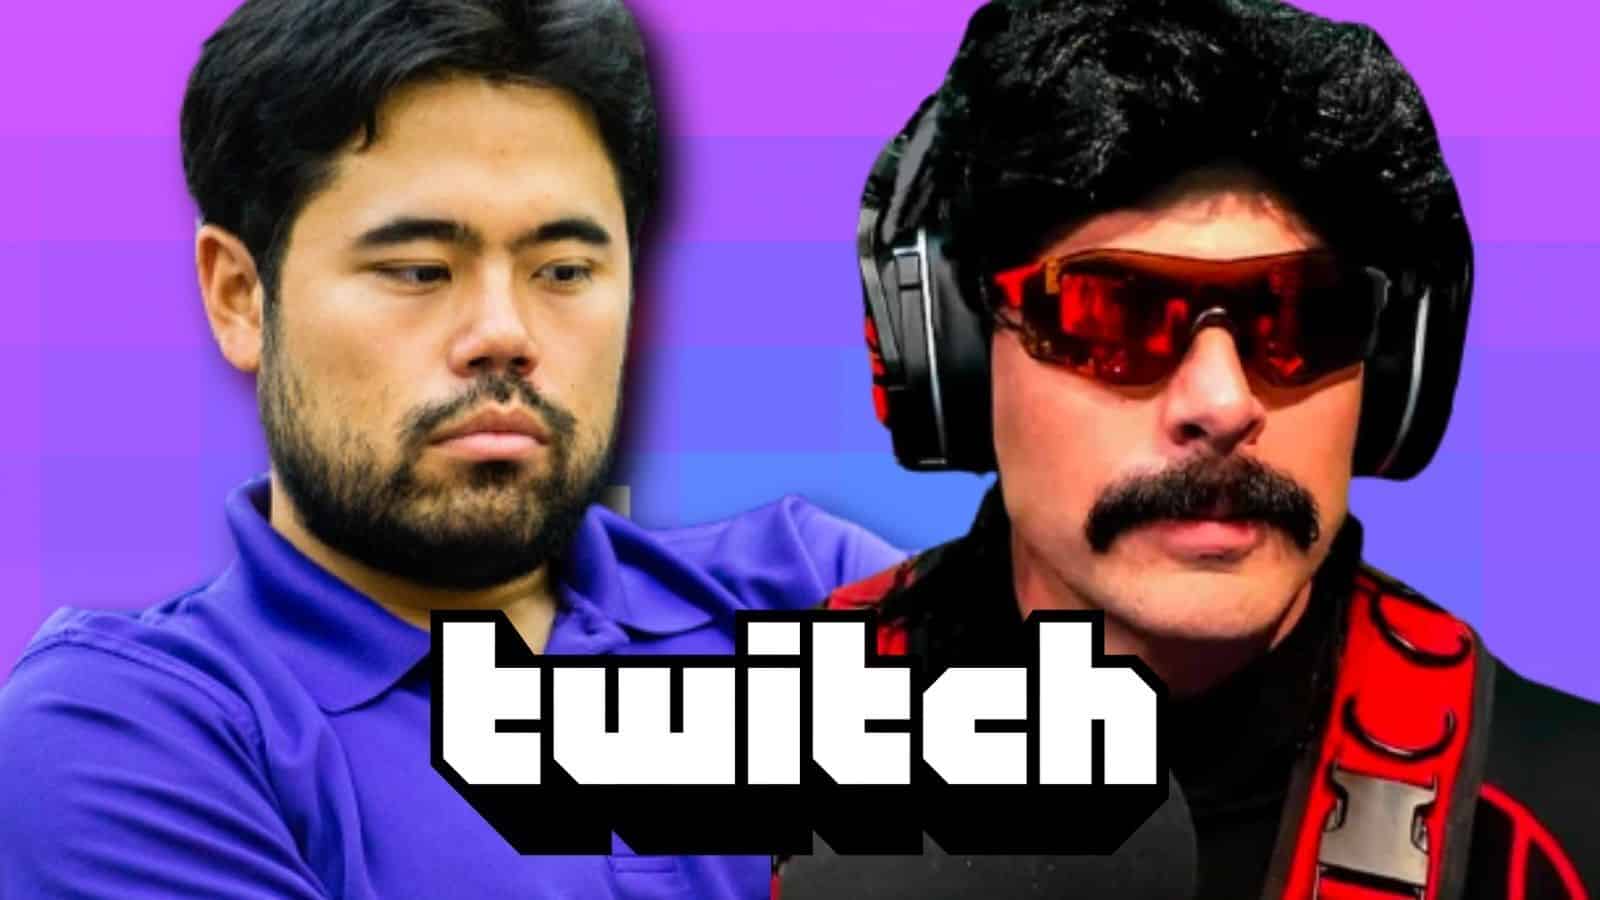 GMHikaru banned on Twitch after watching Dr Disrespect play chess